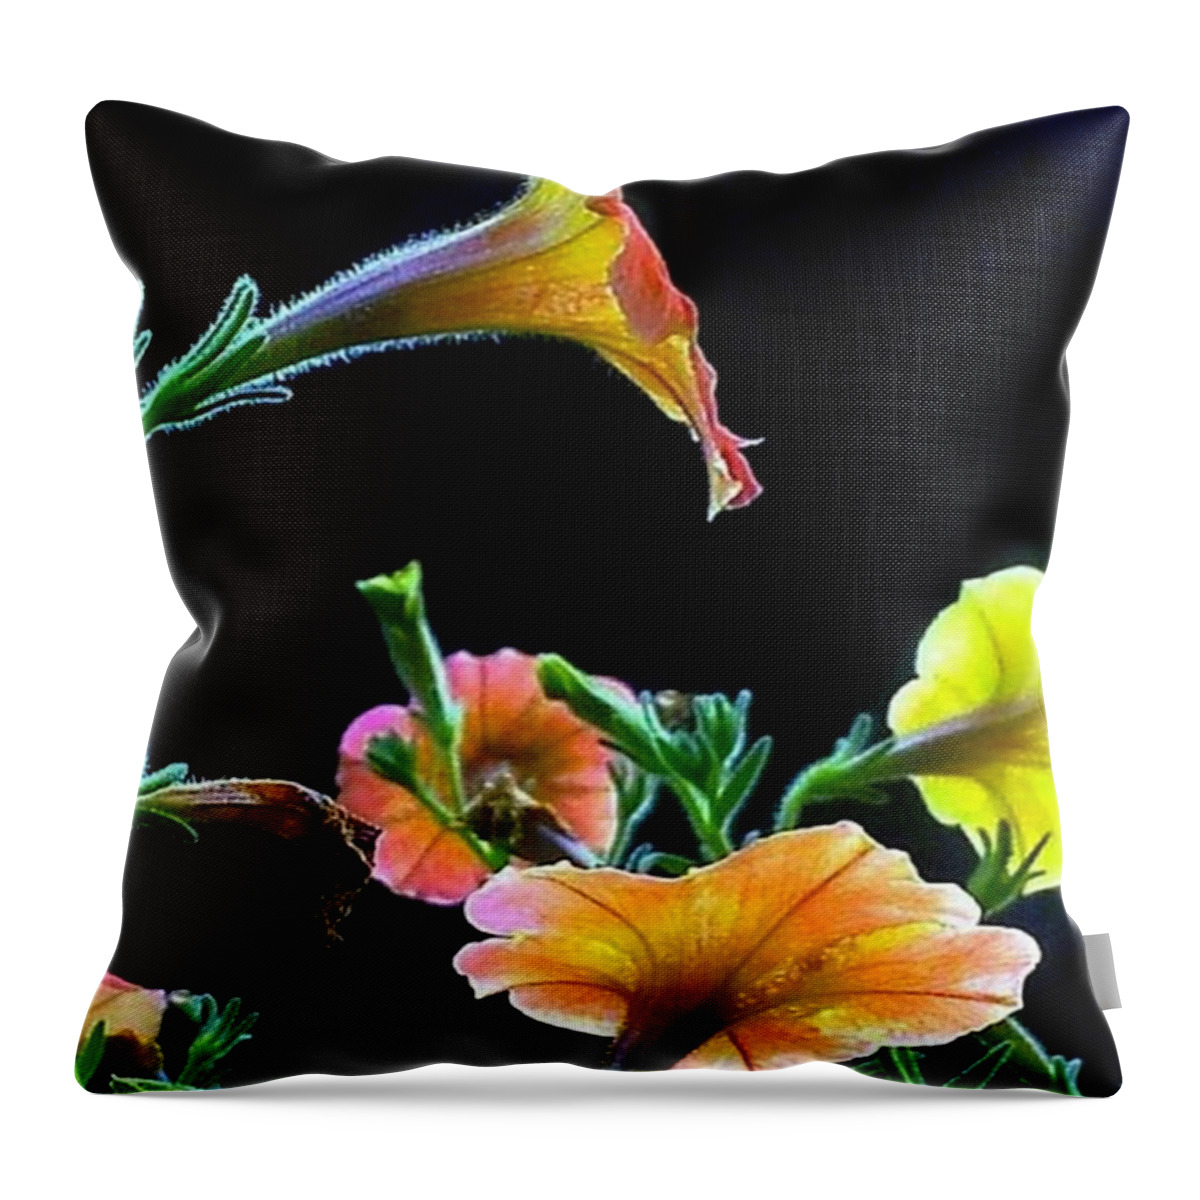 Flowers Throw Pillow featuring the photograph The Profile by Dani McEvoy